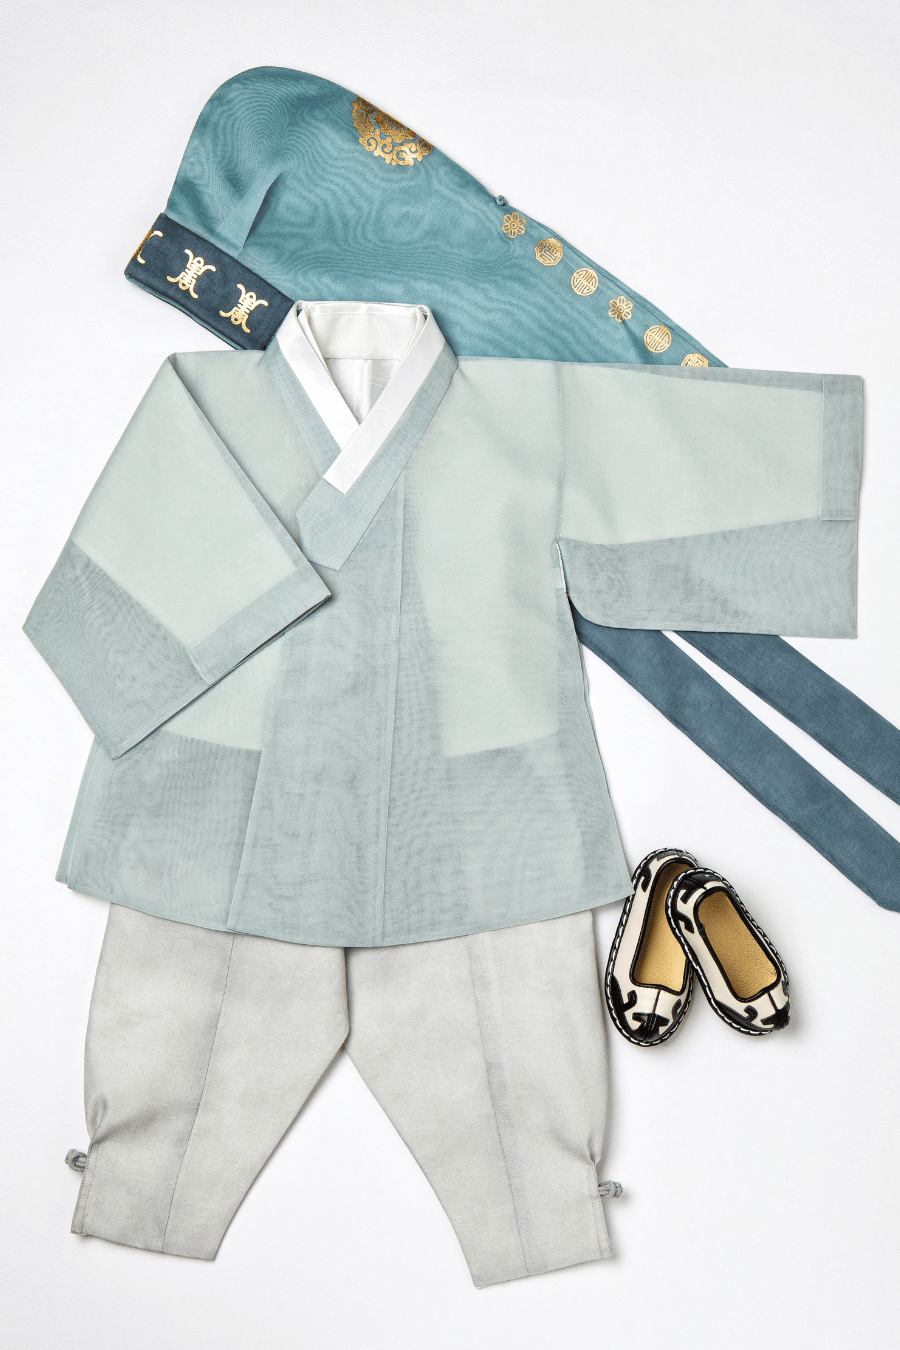 Baby Boy's Dohl Hanbok #31 (luxe line)